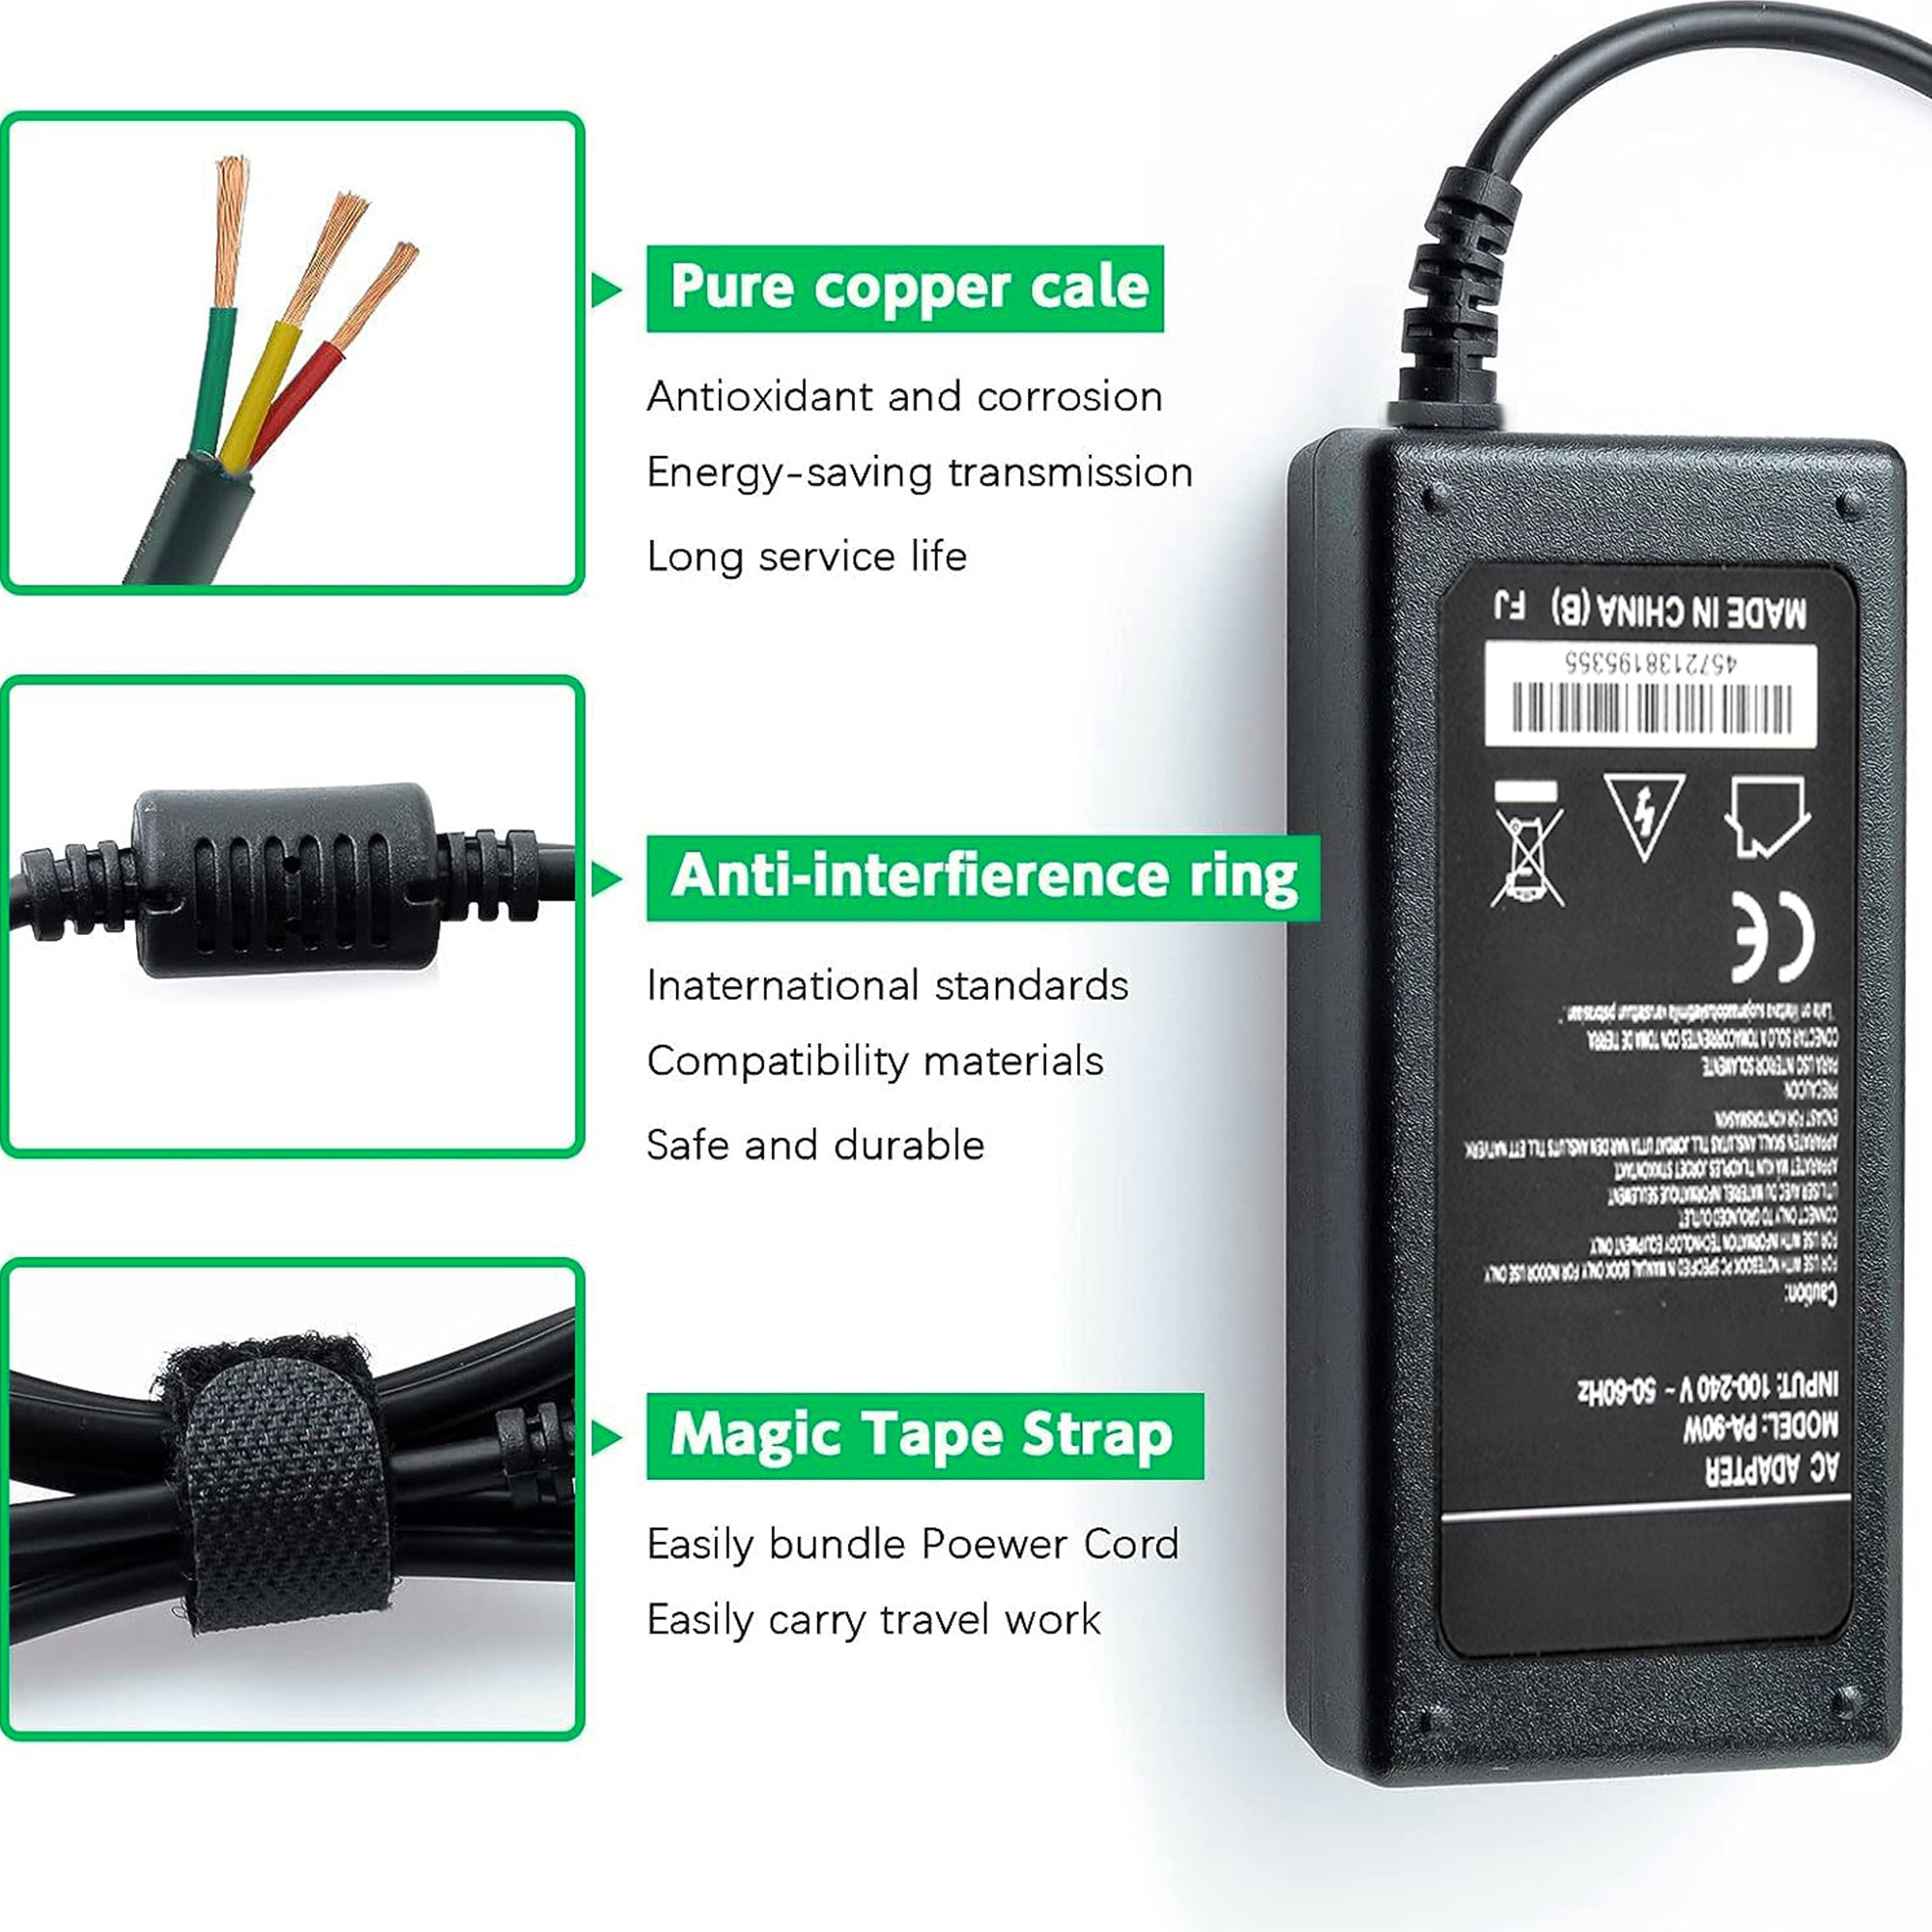 AbleGrid  18V AC DC Adapter Compatible with Protek Power PMP92S-13-1 PMP92SF-13-1 PMP92S-131 PMP92SF-131 TRC Electronics Inc. Desk Top 18VDC Power Supply Cord Cable PS Battery Charger Mains PSU